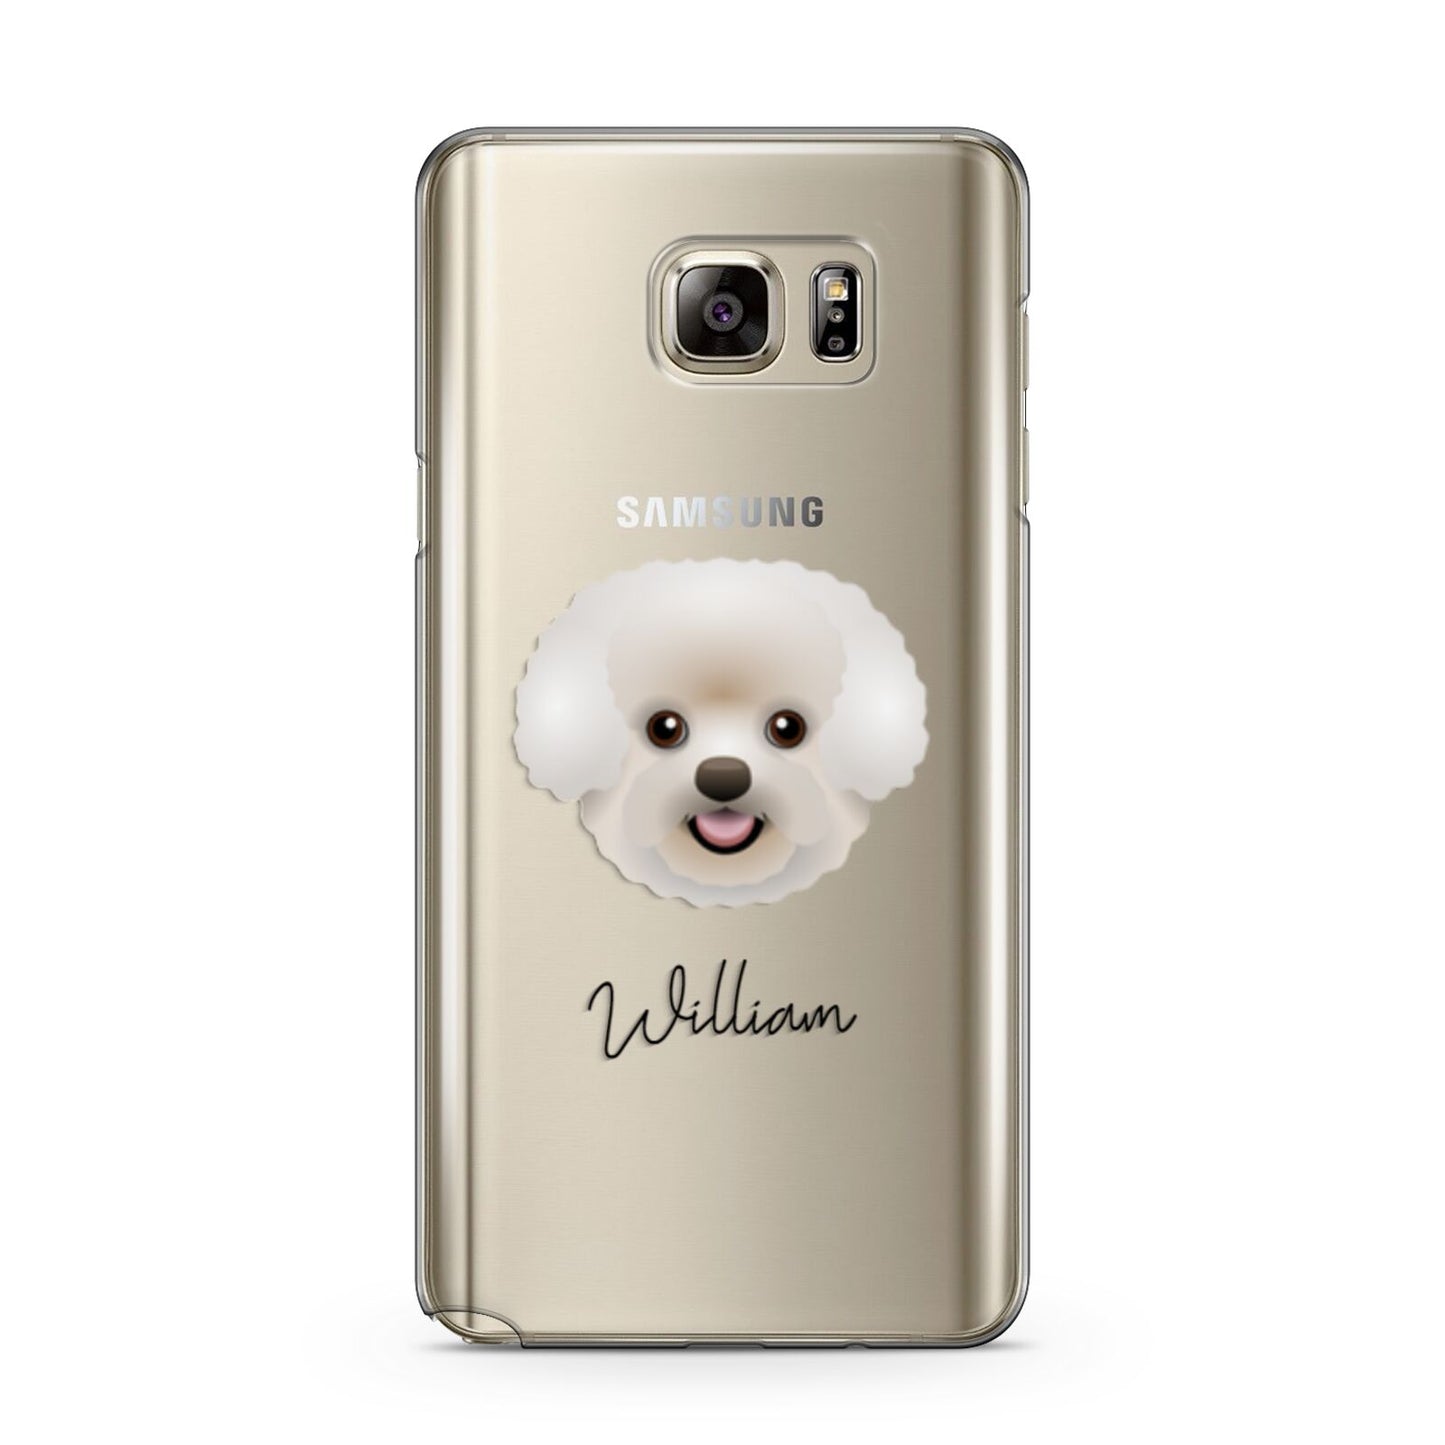 Bichon Frise Personalised Samsung Galaxy Note 5 Case